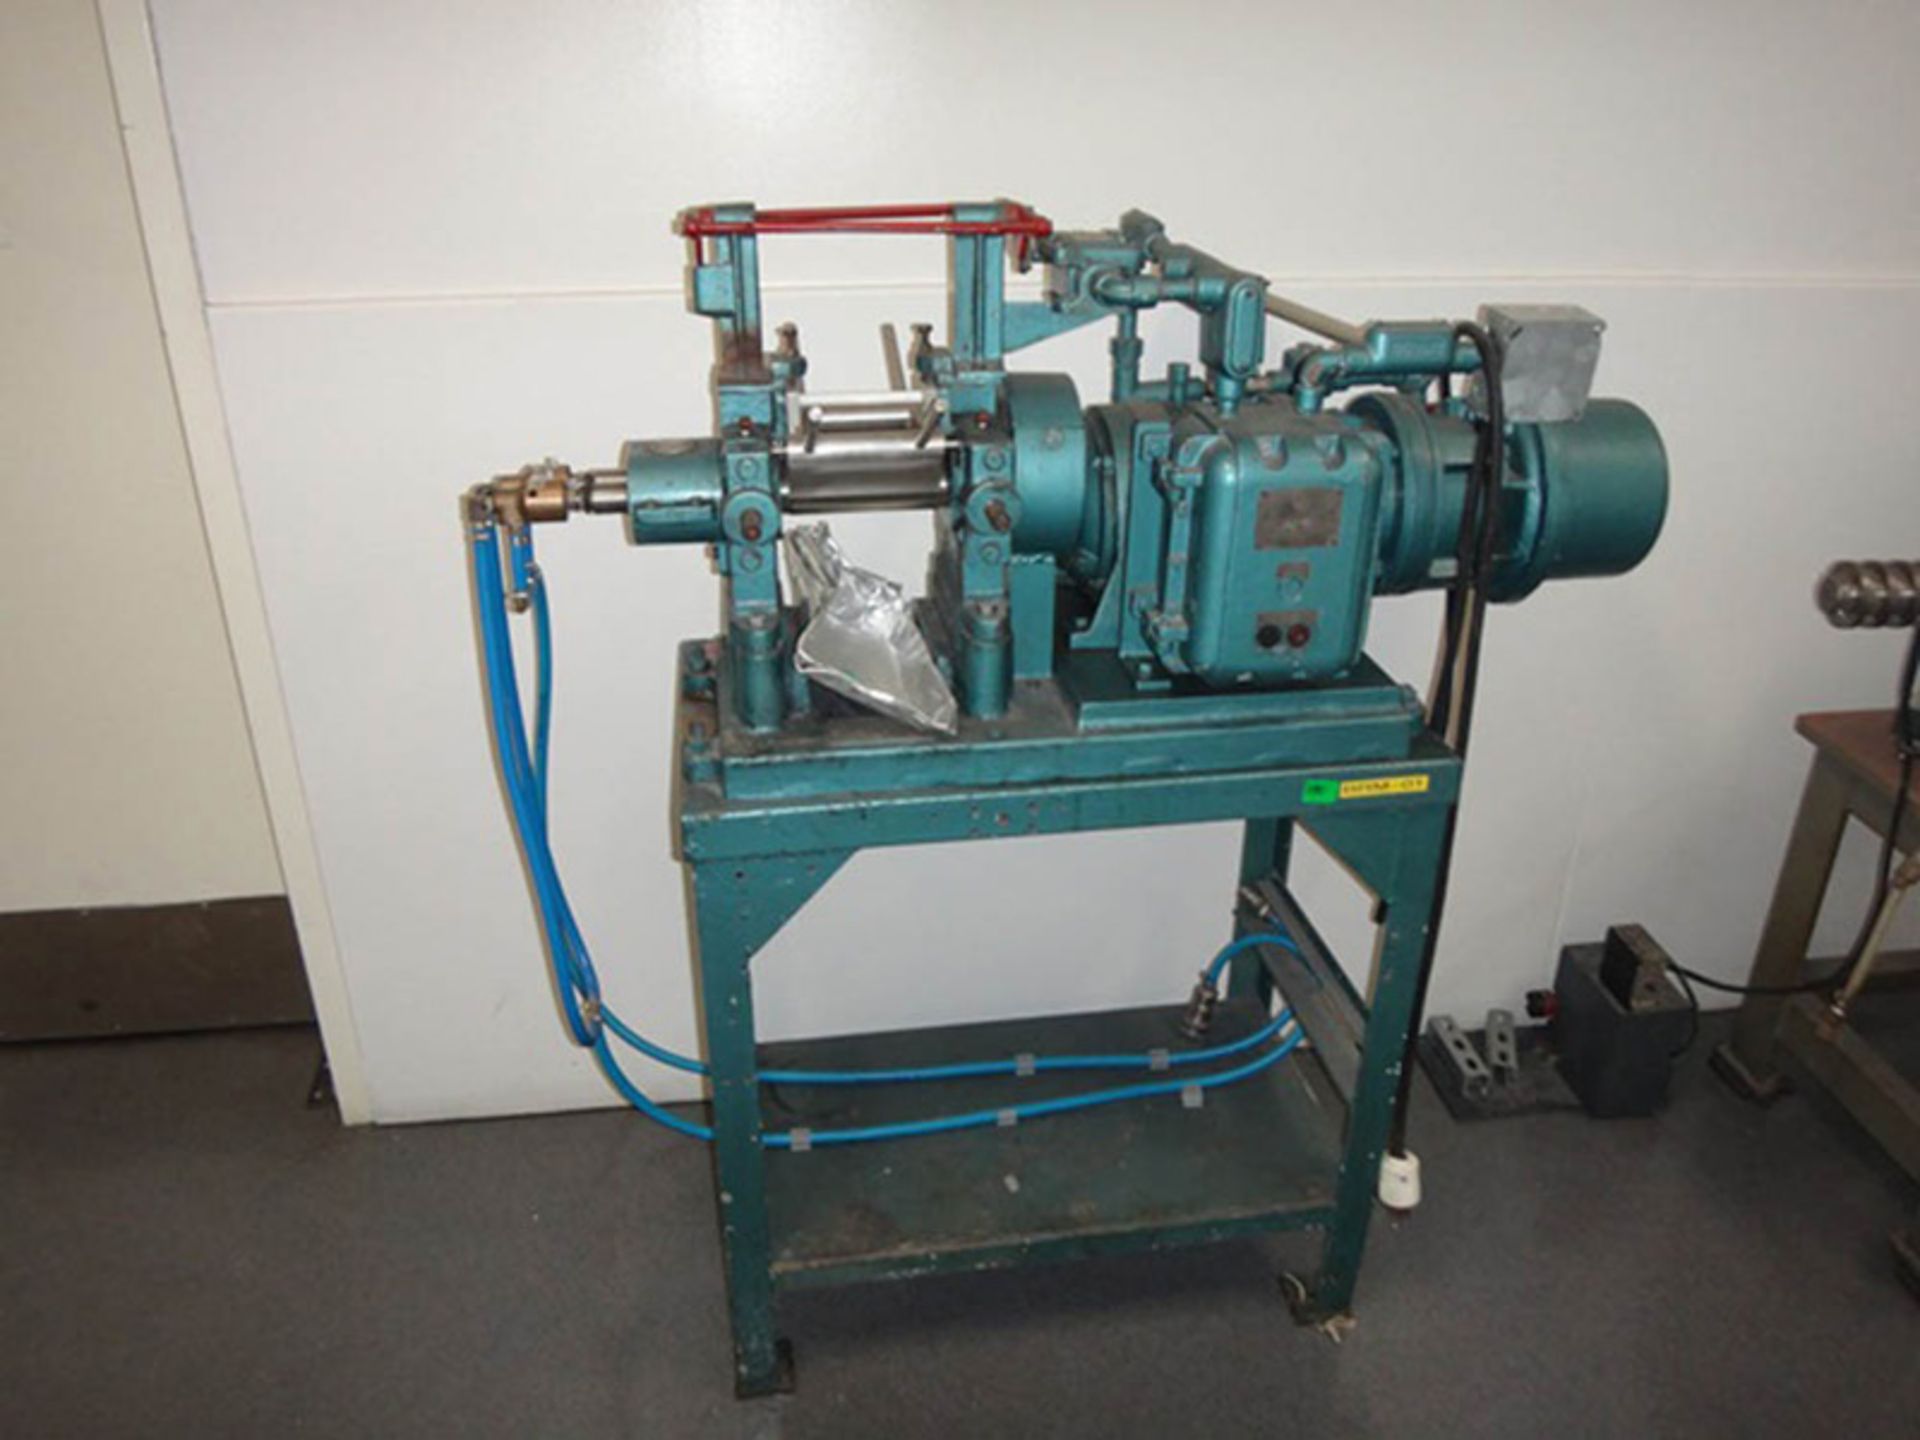 Reliable Lab Two Roll Mill, S/N 2020 - Located At: Huntington Park, CA